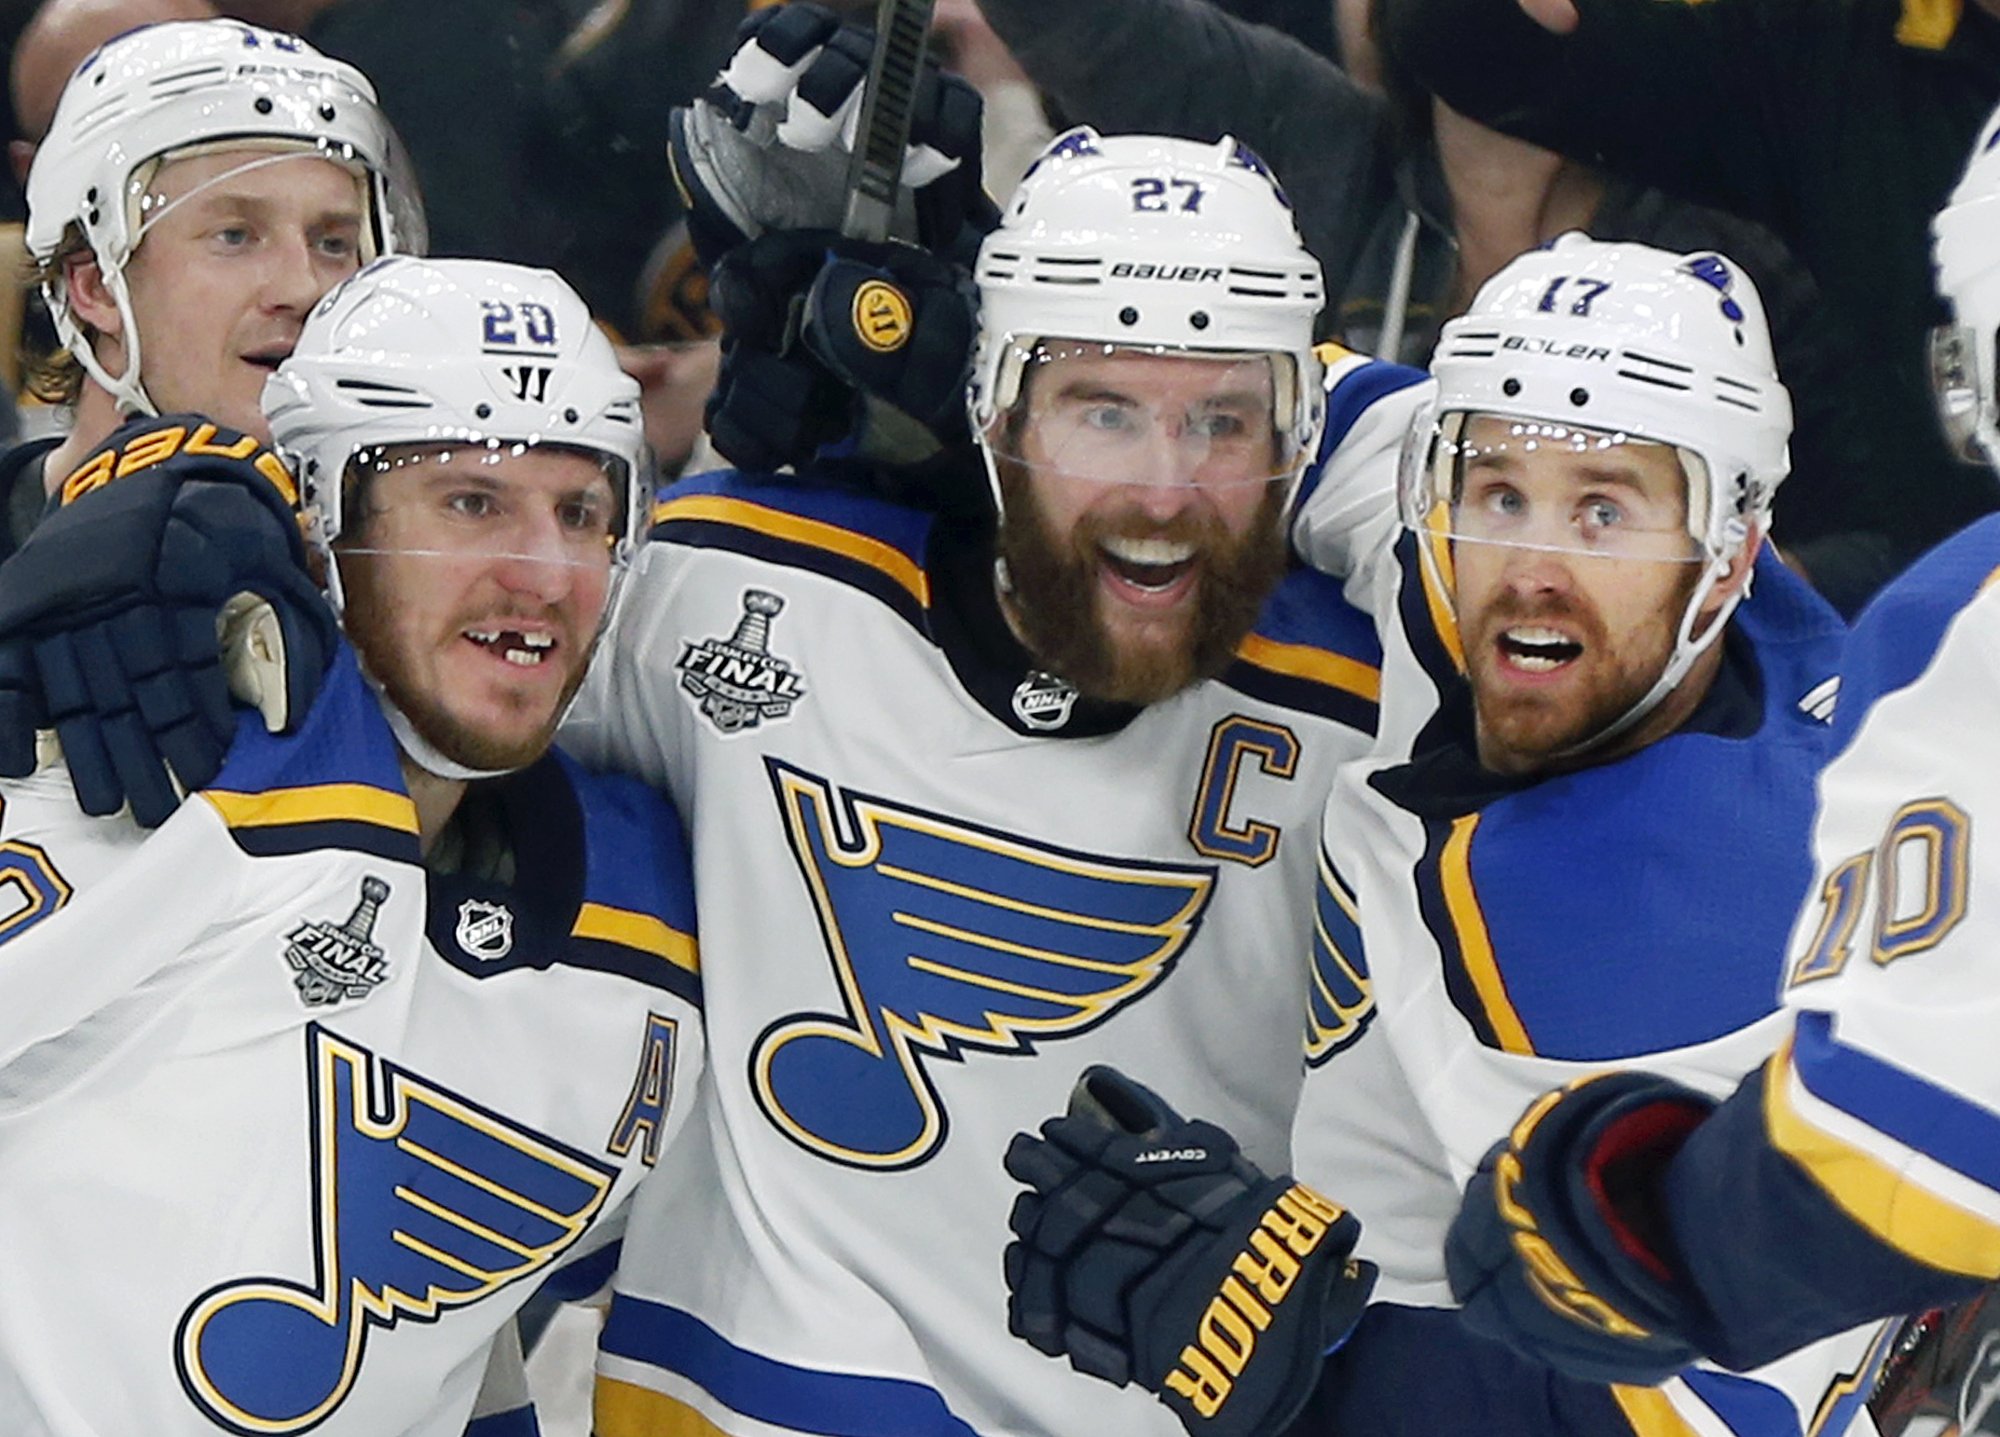 St. Louis Blues' Alex Pietrangelo, second from right, celebrates his goal with teammates Jay Bouwmeester, left rear, Alexander Steen, left, and Jaden Schwartz, right, during the first period in Game 7 of the NHL hockey Stanley Cup Final, Wednesday, June 12, 2019, in Boston. (AP Photo/Michael Dwyer)